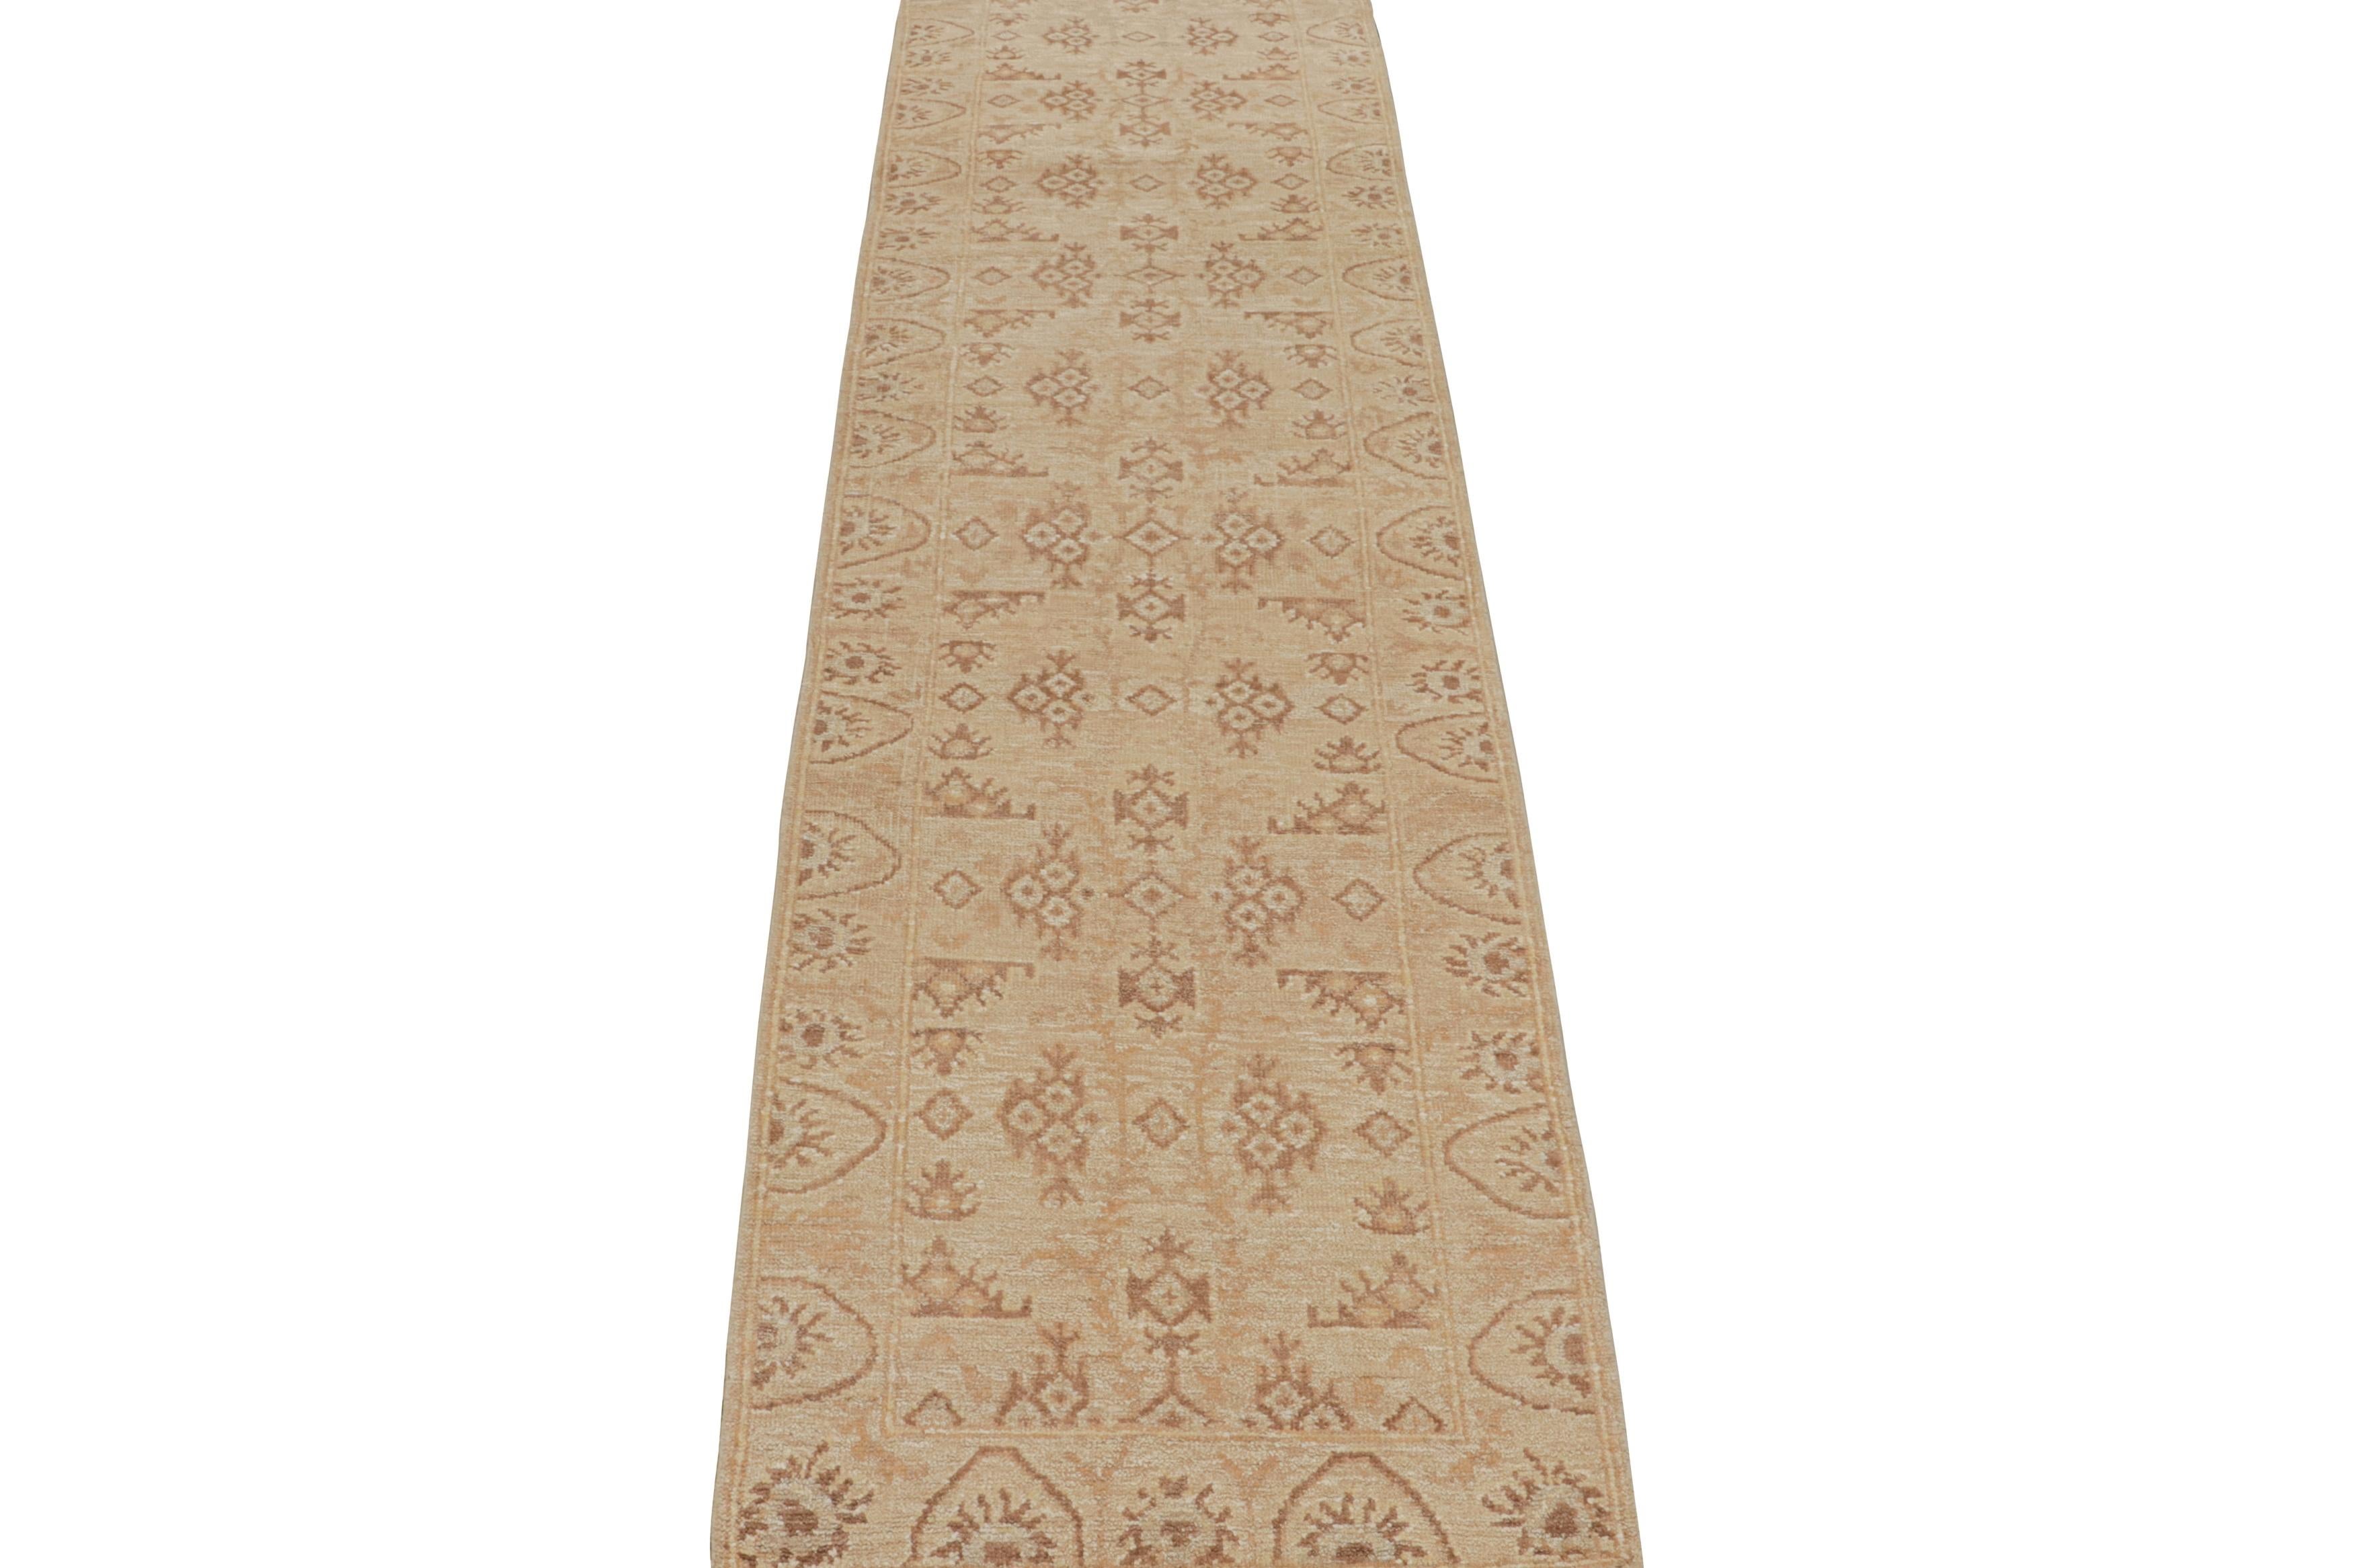 Indian Rug & Kilim’s Oushak Style Rug in Beige-Brown Floral Pattern For Sale